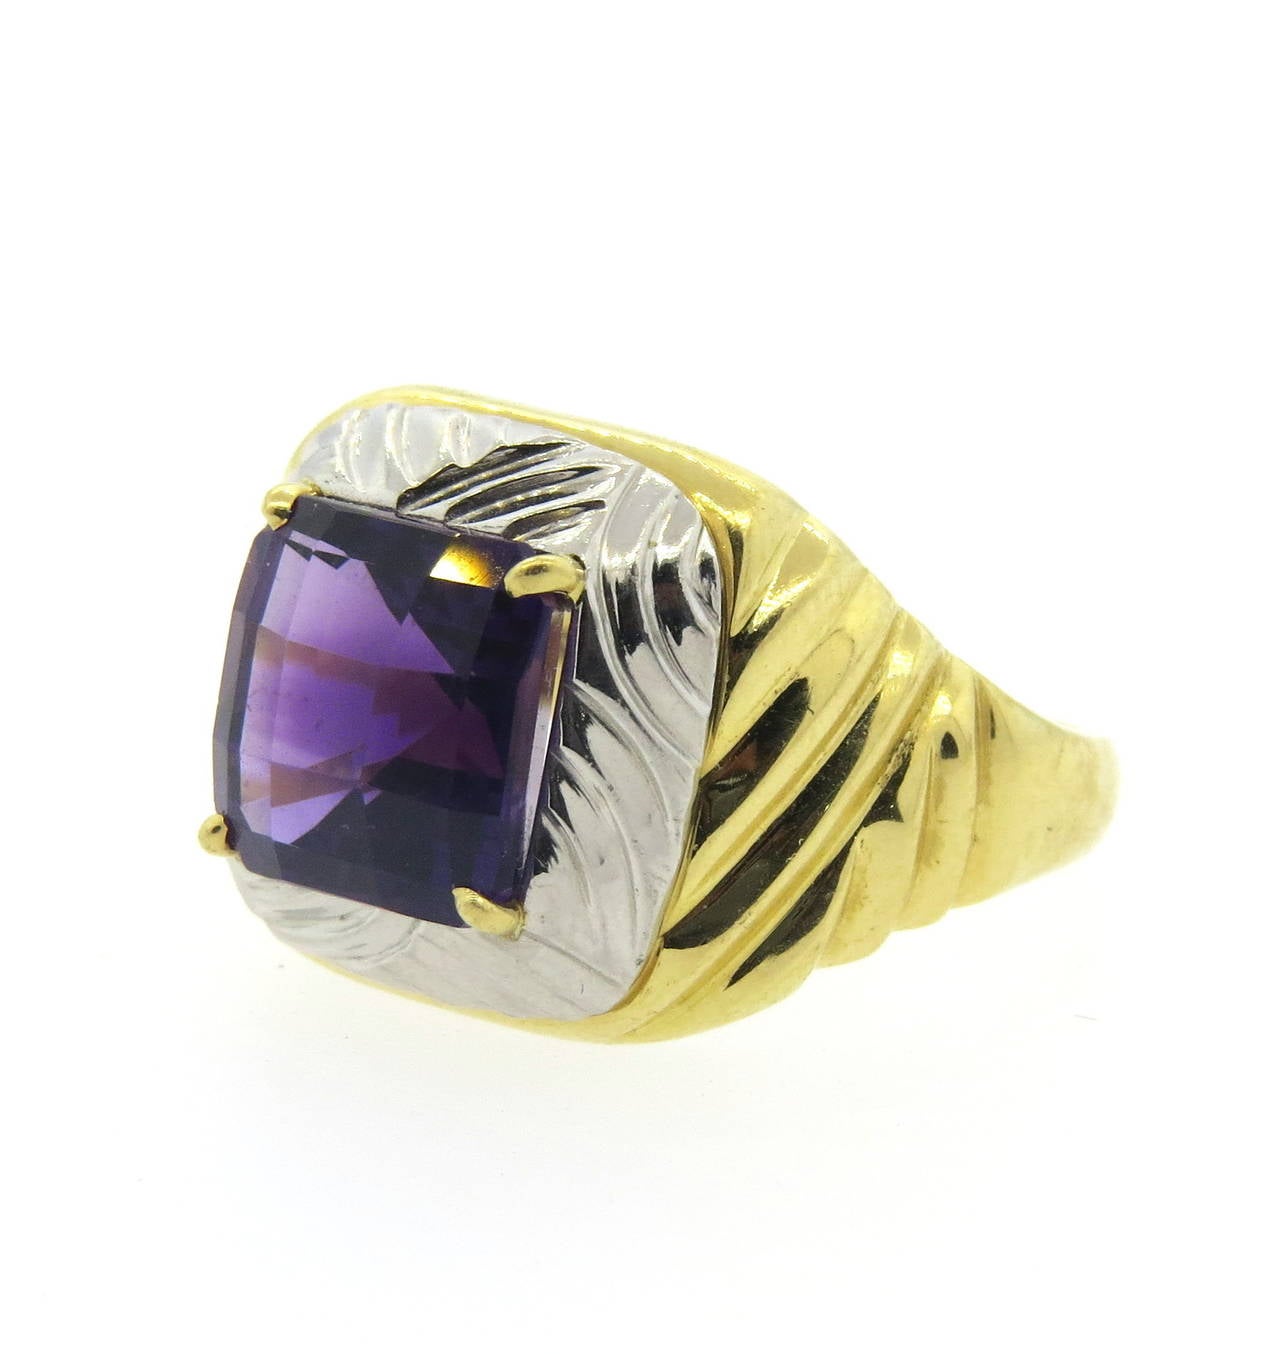 An 18k yellow gold and platinum ring, set with an amethyst weighing approximately 4.50ct.  Crafted by Michael Bondanza, the ring is a size 8.25 and 16.4mm wide